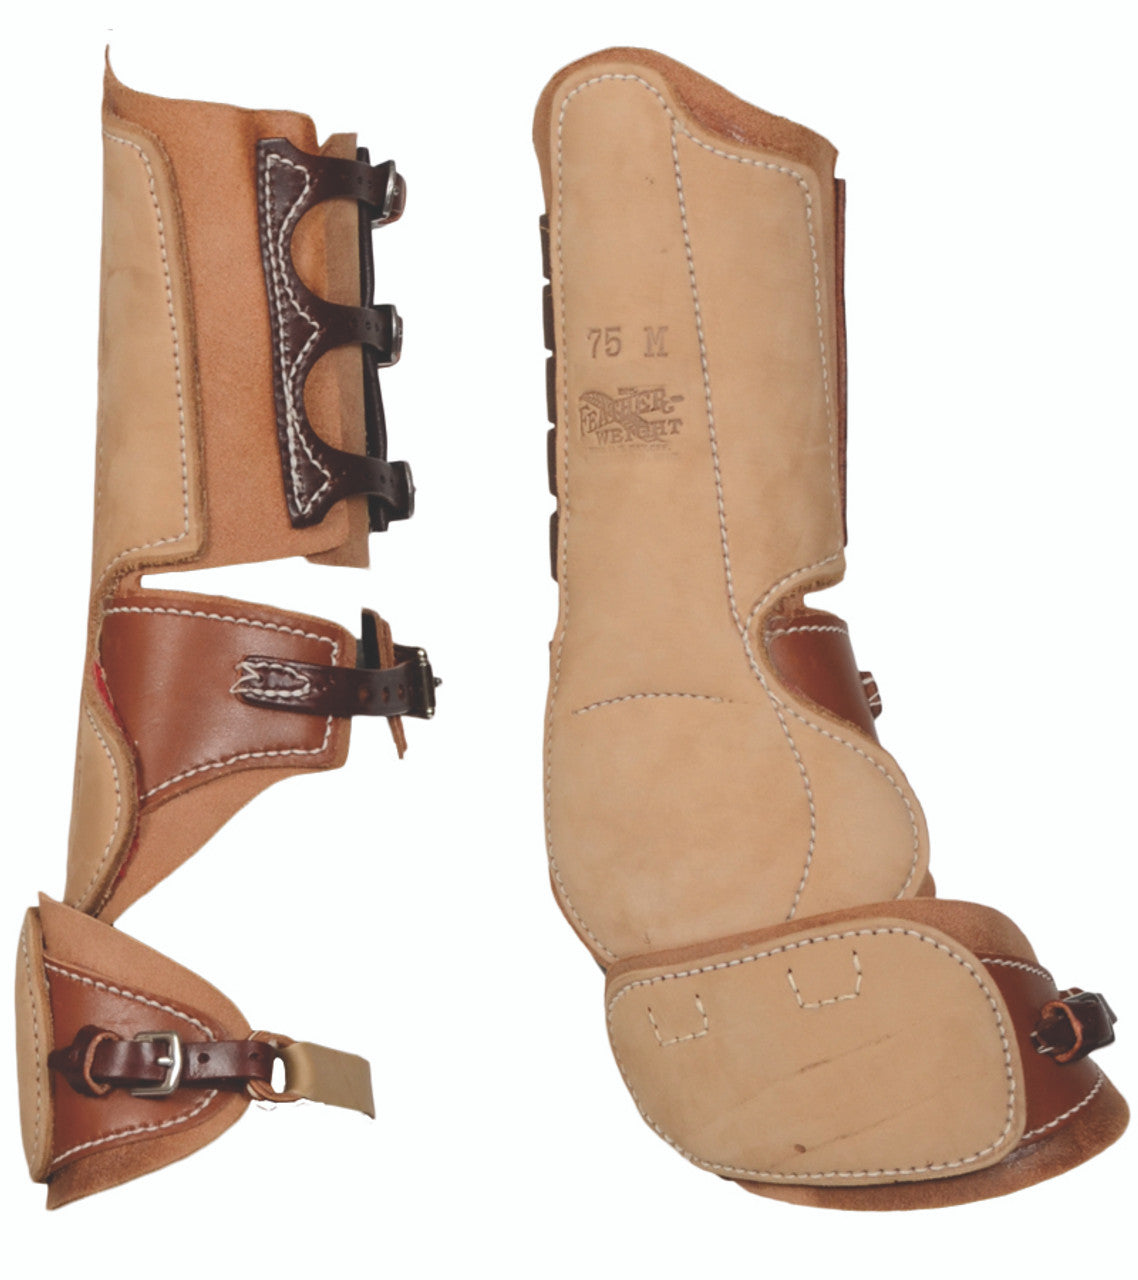 Feather-Weight Hind, Shin & Ankle Boots with Stitched On Speedy Cut-TexanSaddles.com